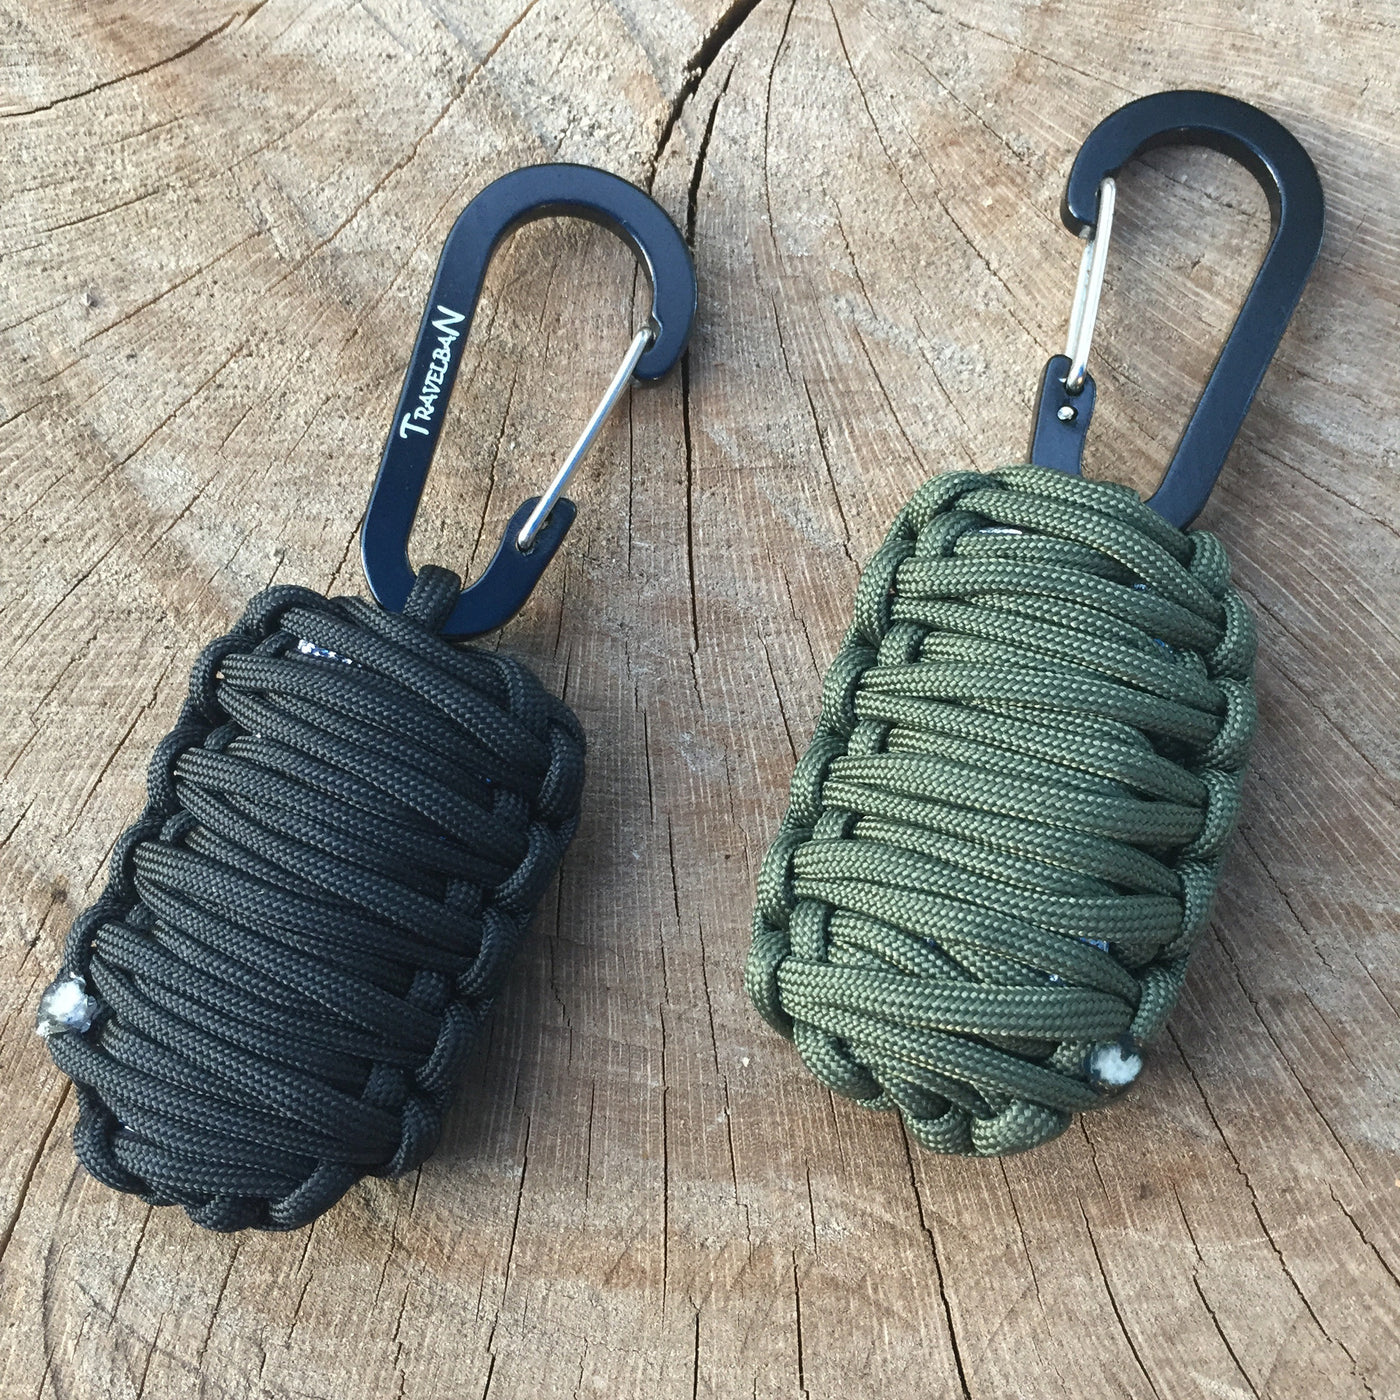 The Paracord Grenade - clip-on survival kit – Kruger EDC